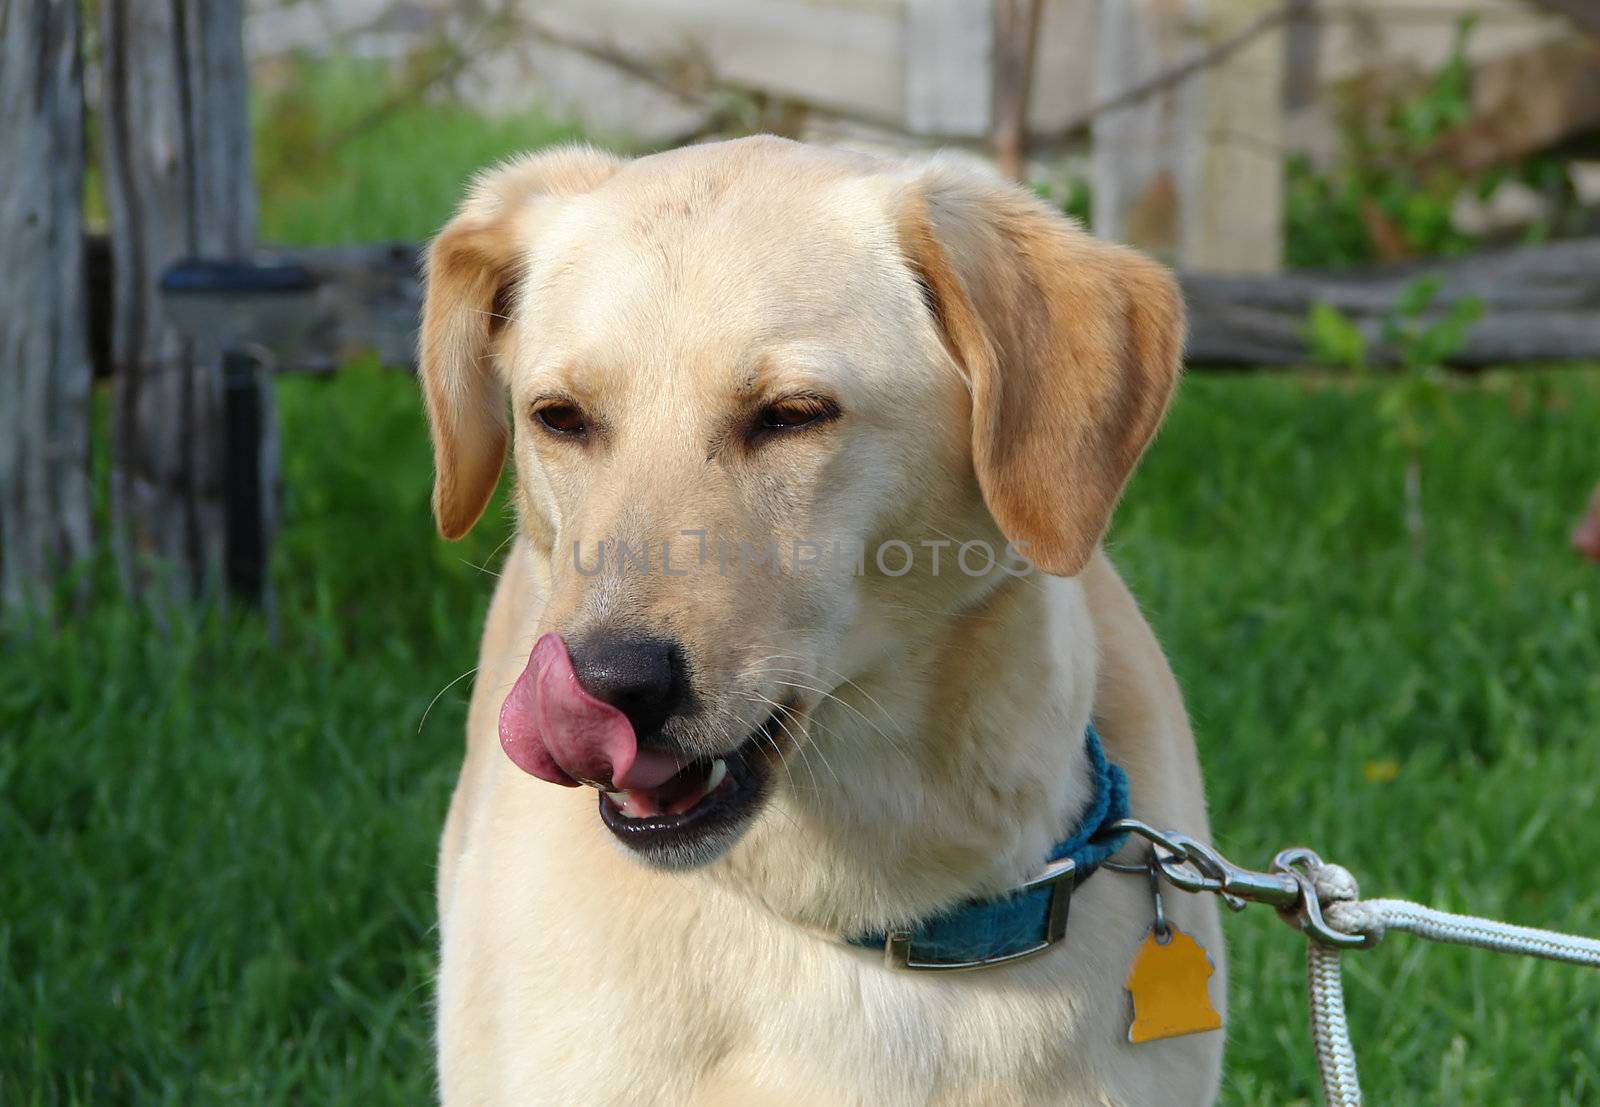 Blond labrador retriever licking its nose wishing it was not tied up (actually looking at the rabbit playing on the lawn).